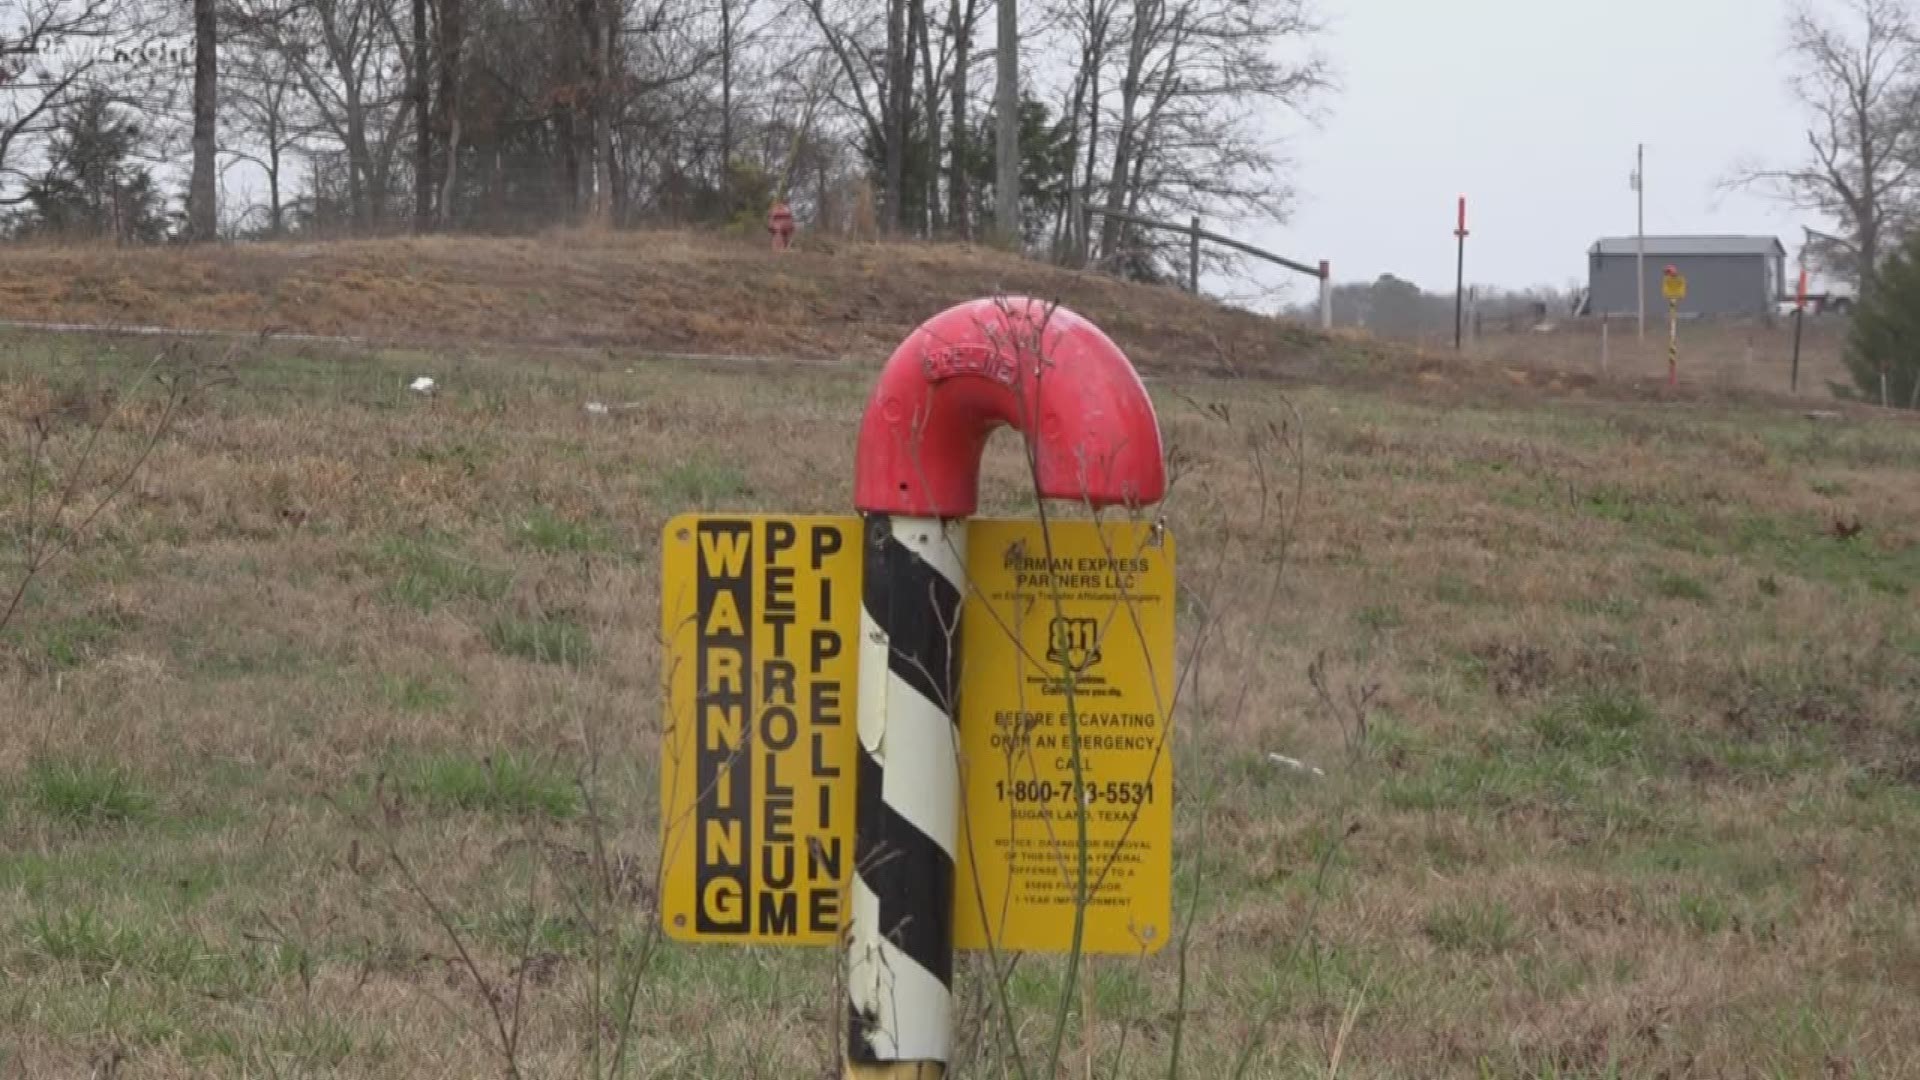 For the past couple of weeks, the owners of the oil pipeline that ruptured in Mayflower in 2013 have been quietly testing it here in Arkansas.